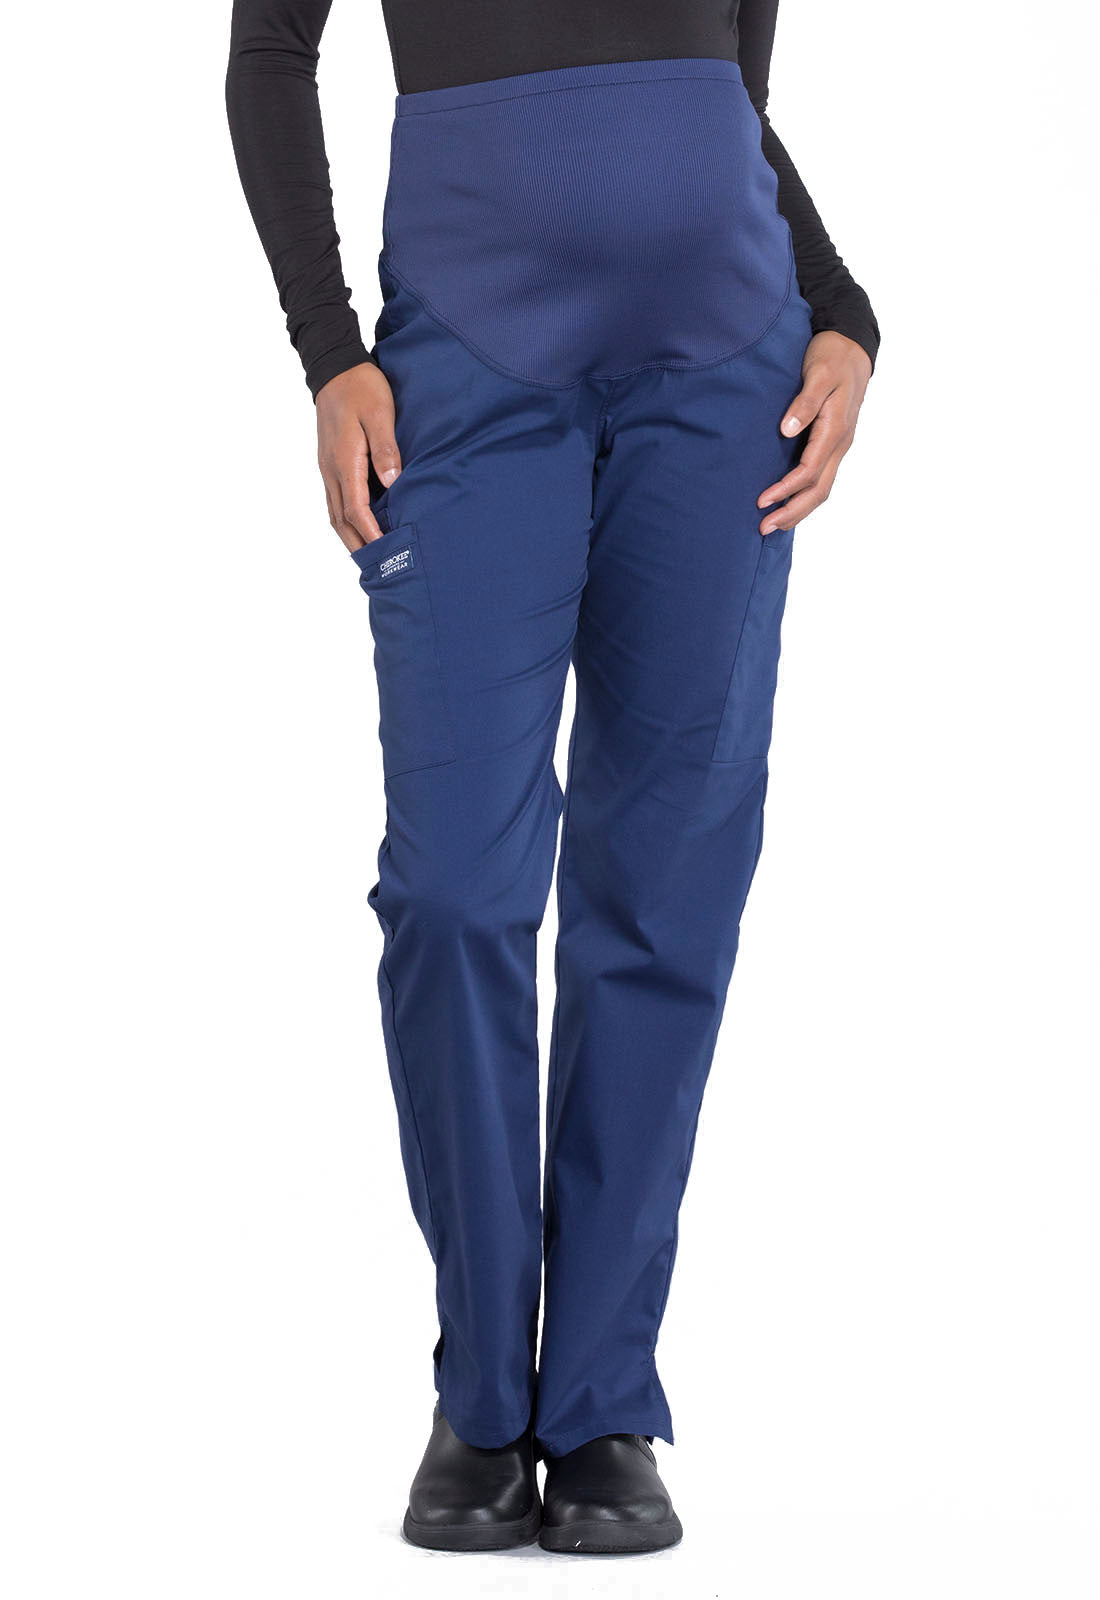 Cherokee Workwear Professionals Maternity Straight Leg Pant (Various Colors, Tall Length)